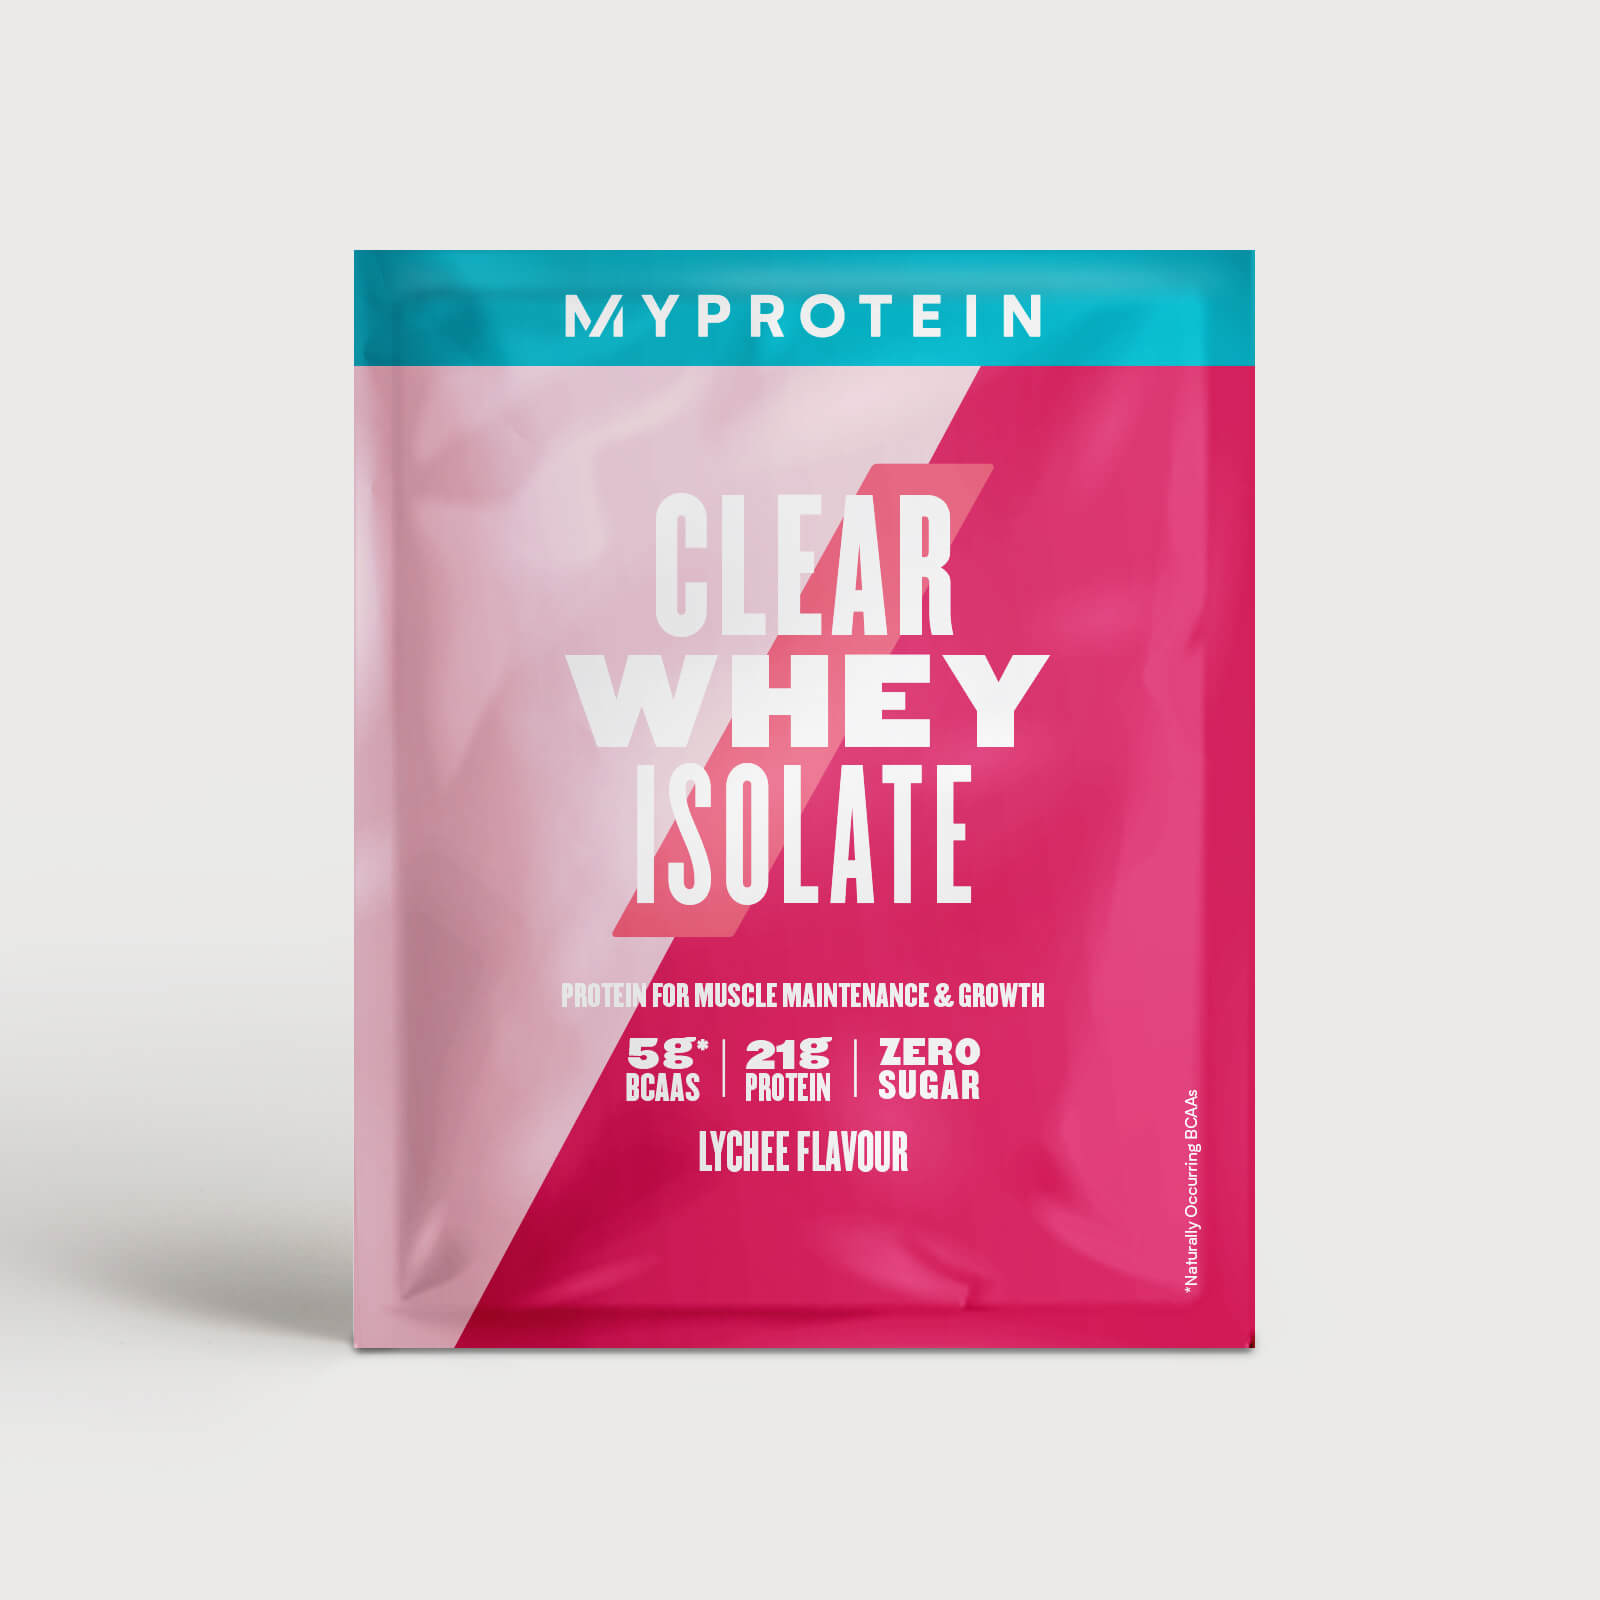 Myprotein Clear Whey Isolate (Sample) - 1servings - Lychee